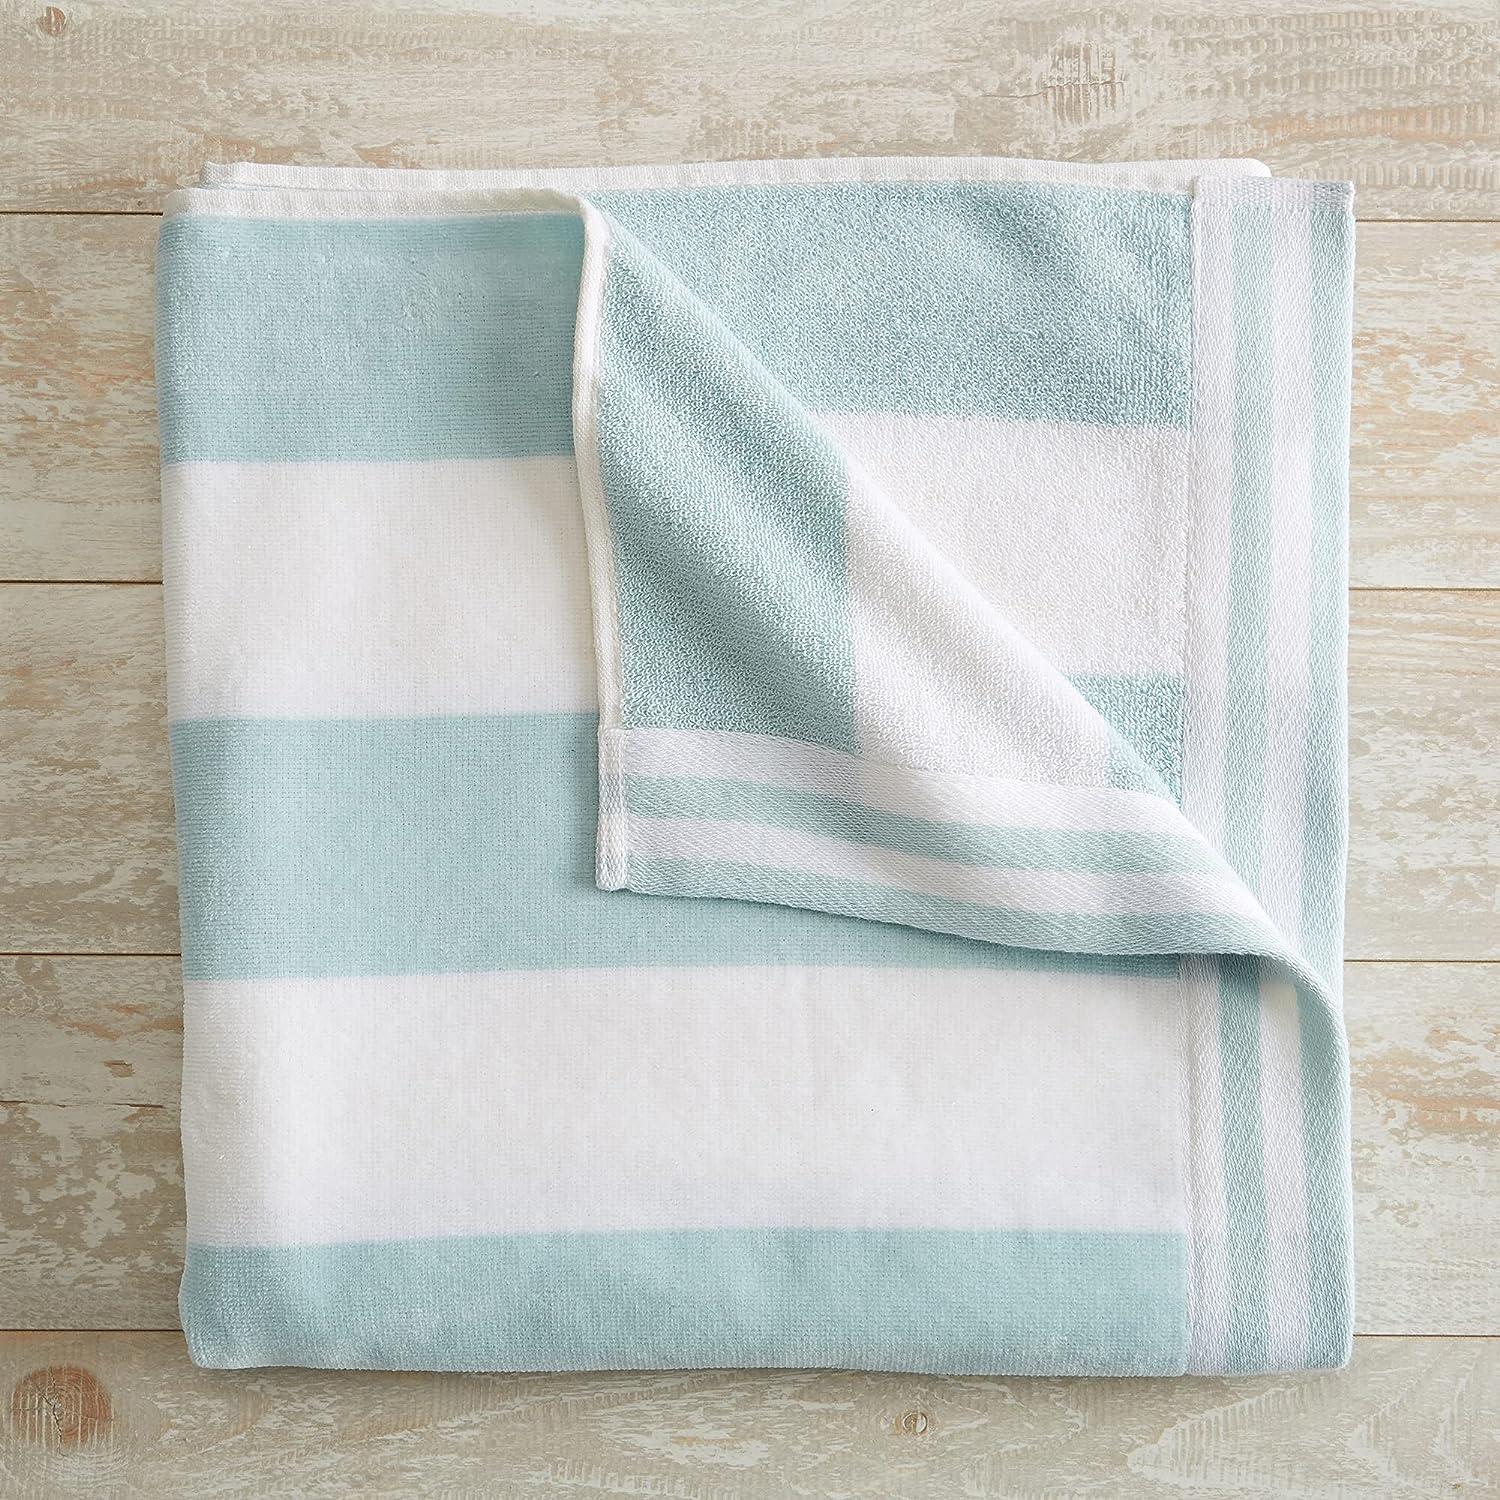 Oversized Cabana Stripe Beach Towels | Novia Collection by Great Bay Home